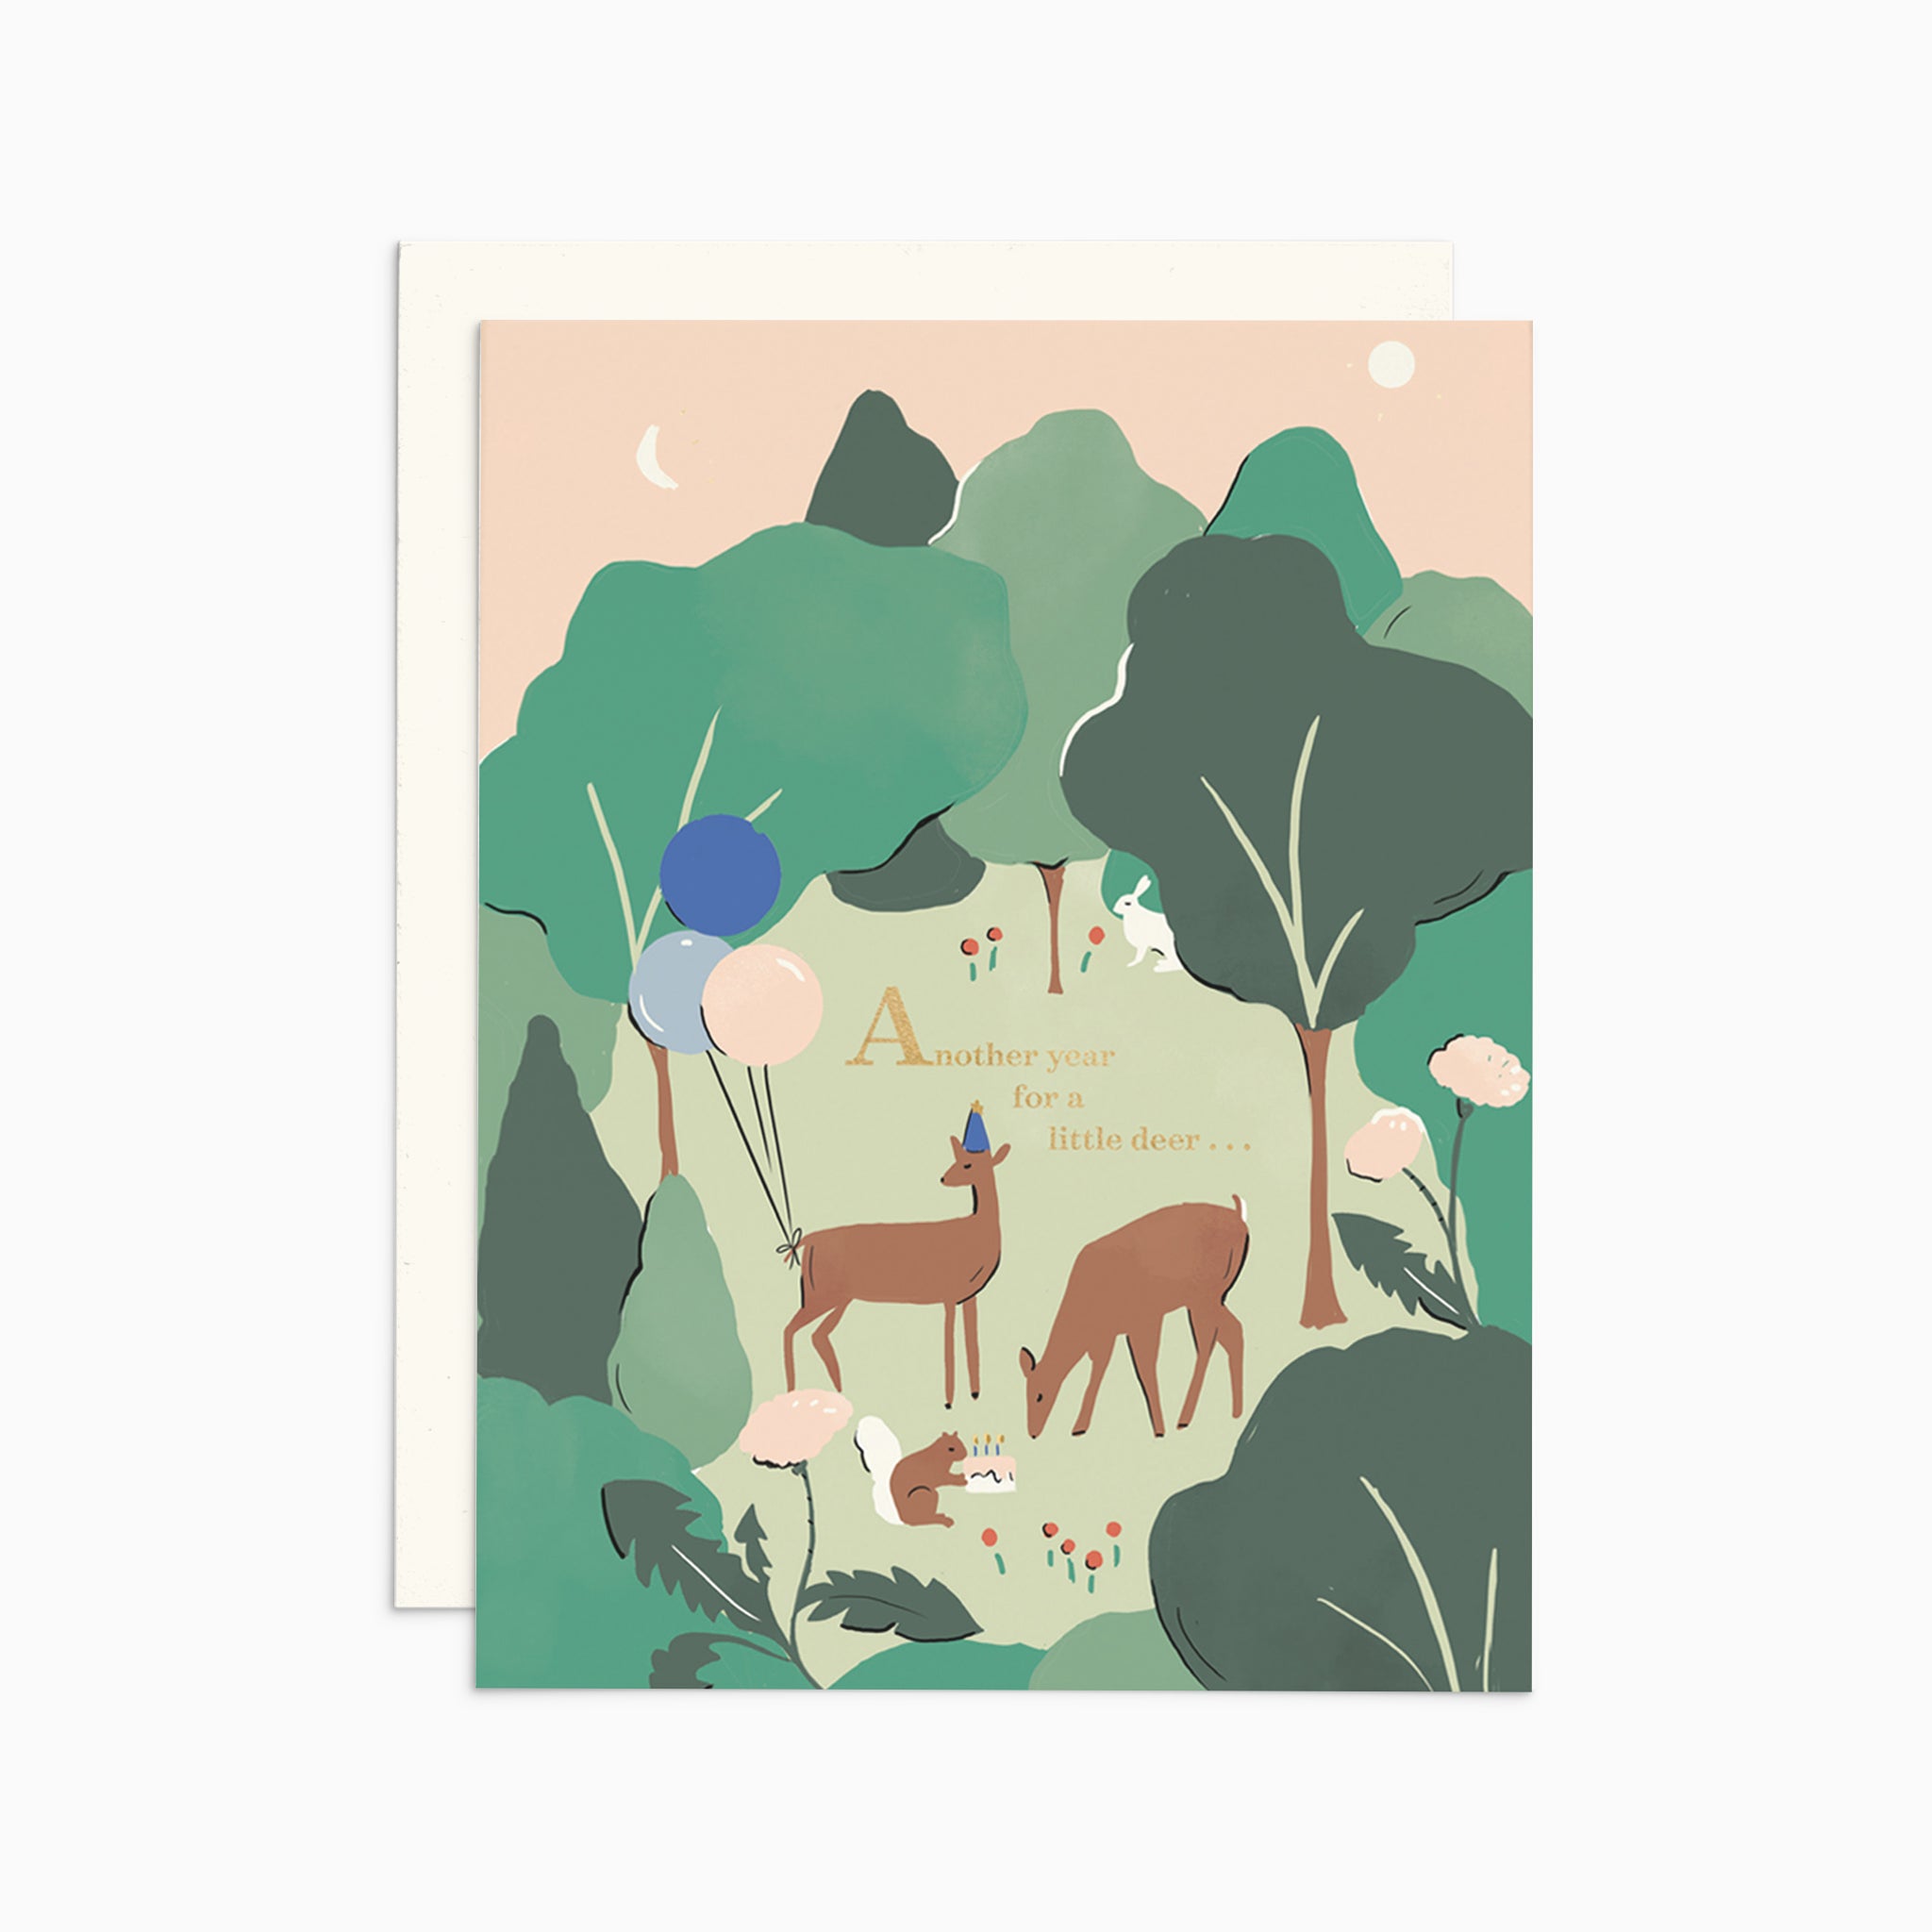 Illustrated birthday card with metallic gold foil text saying 'Another Year Older, My Little Deer,' featuring two deer in birthday hats and balloons on warm white cover cardstock.